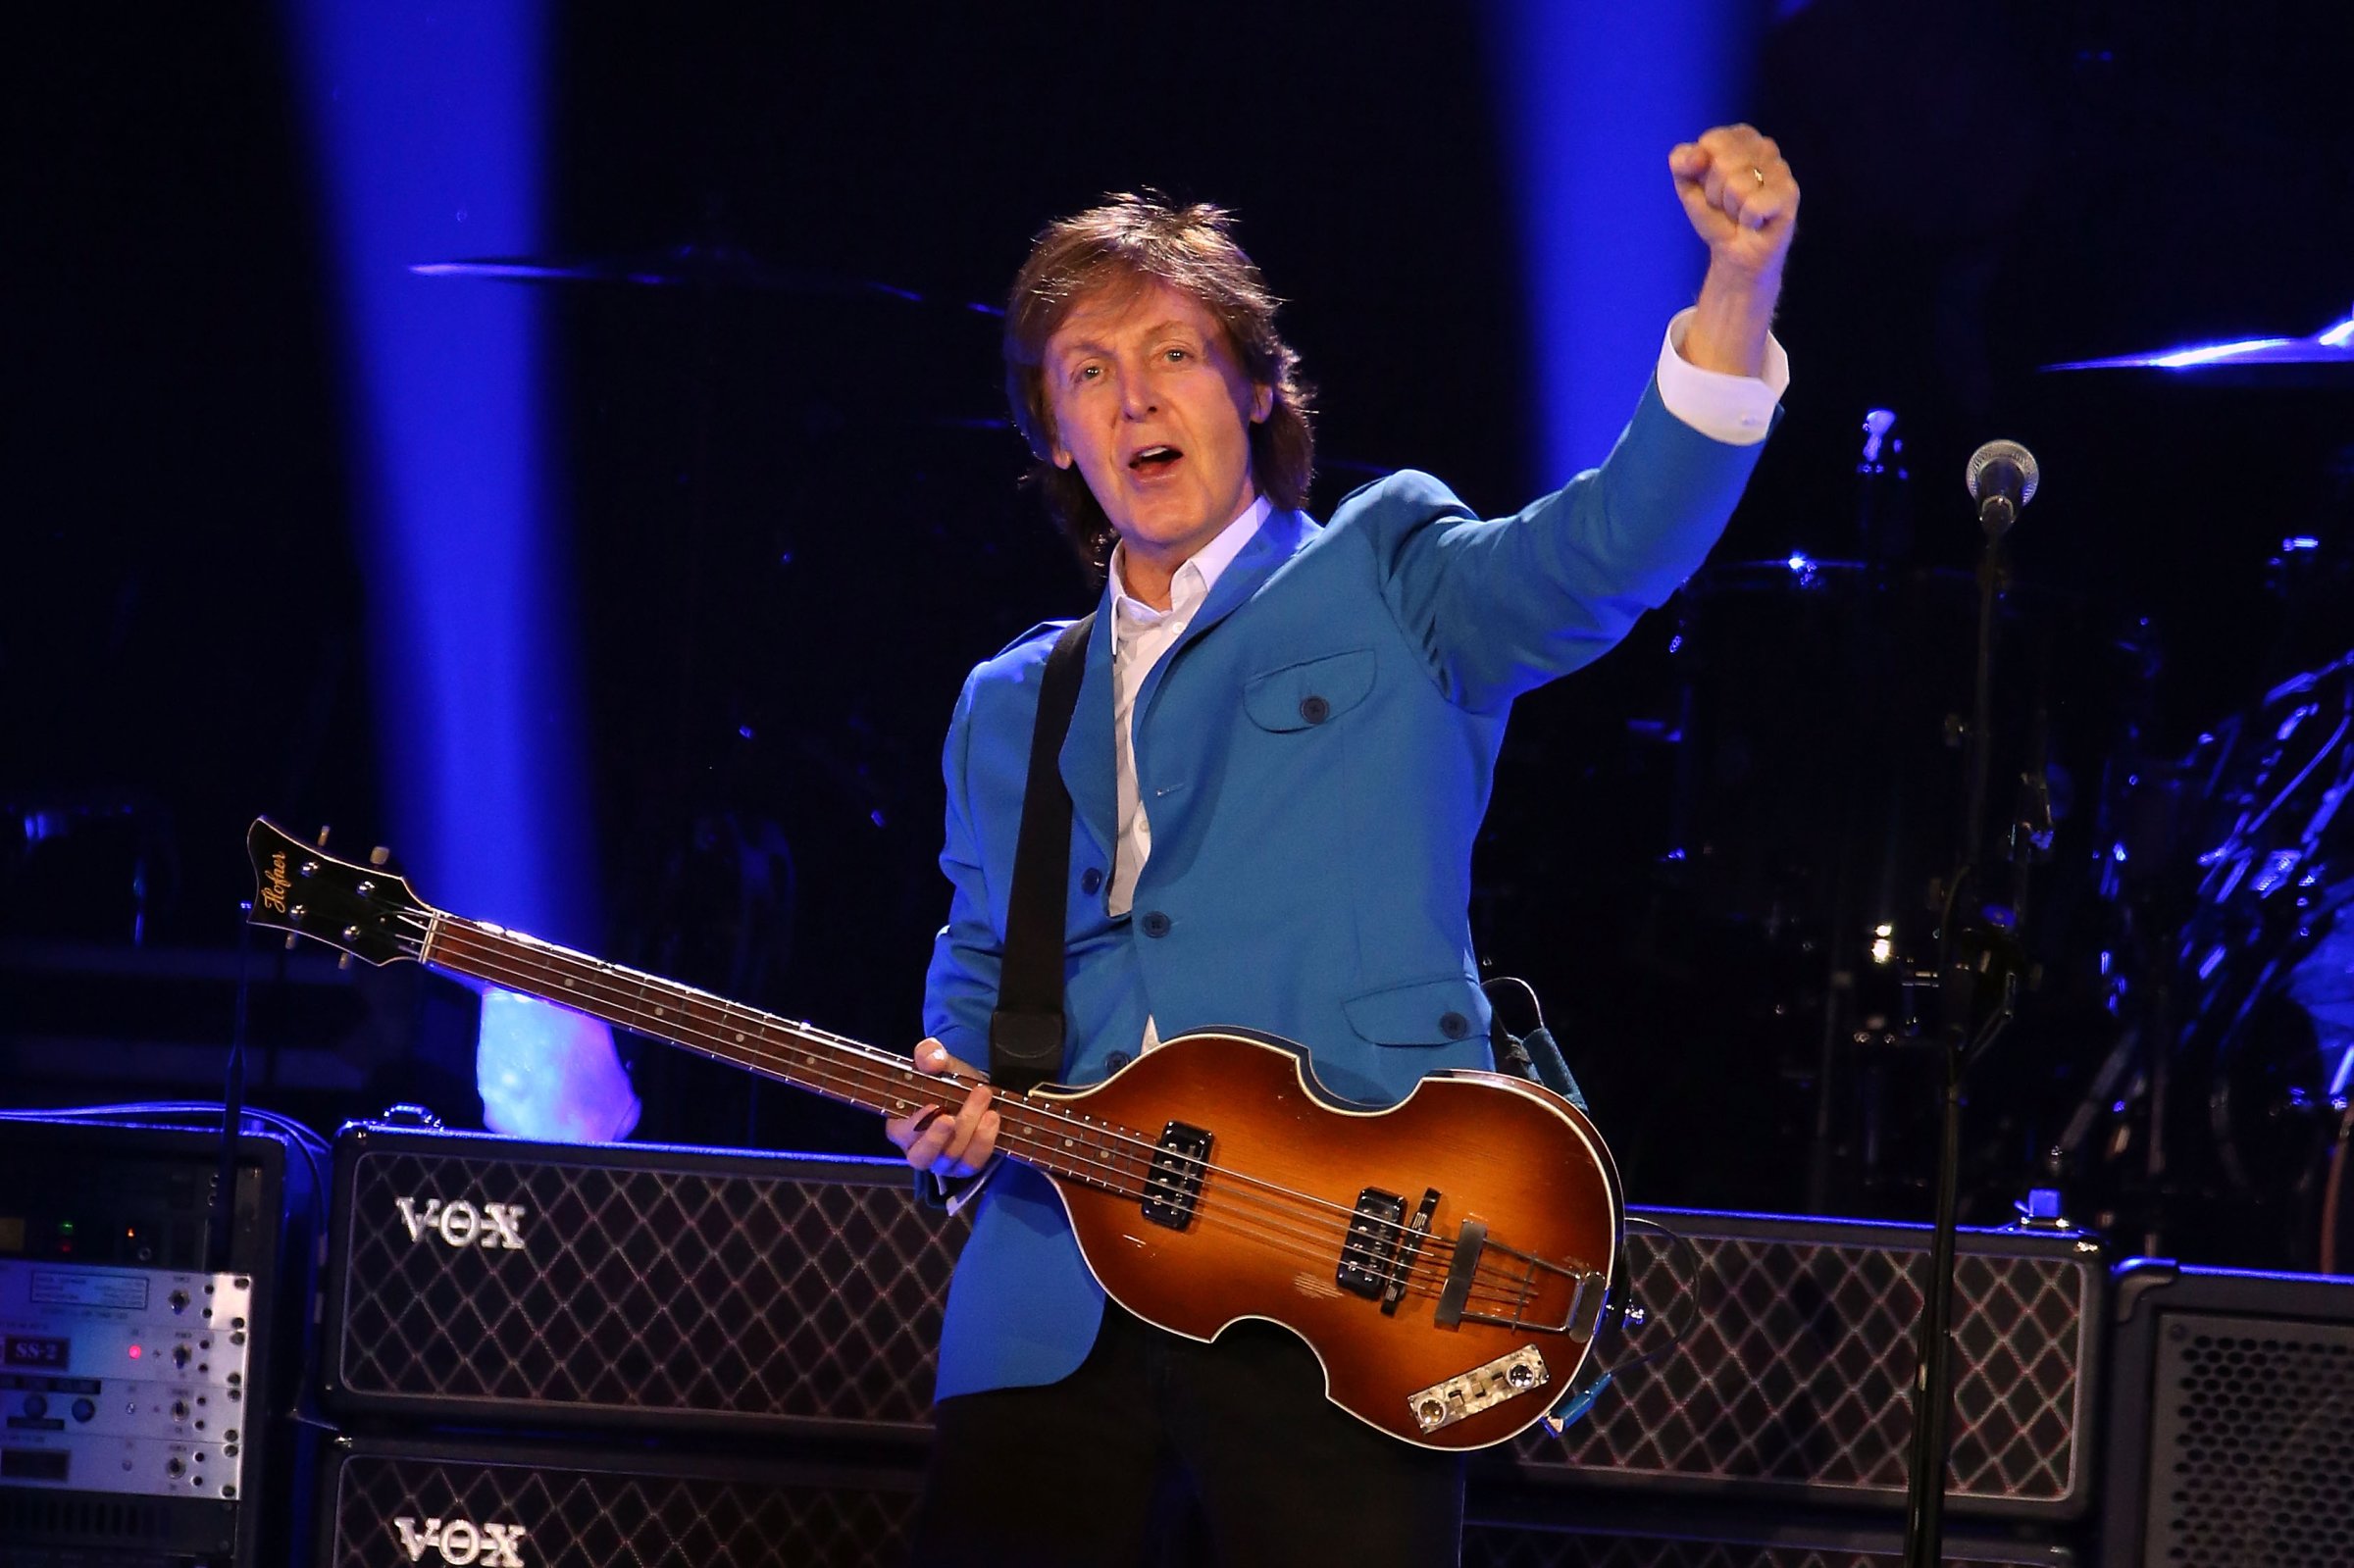 Sir Paul McCartney performs in concert at Times Union Center on July 5, 2014 in Albany, New York.